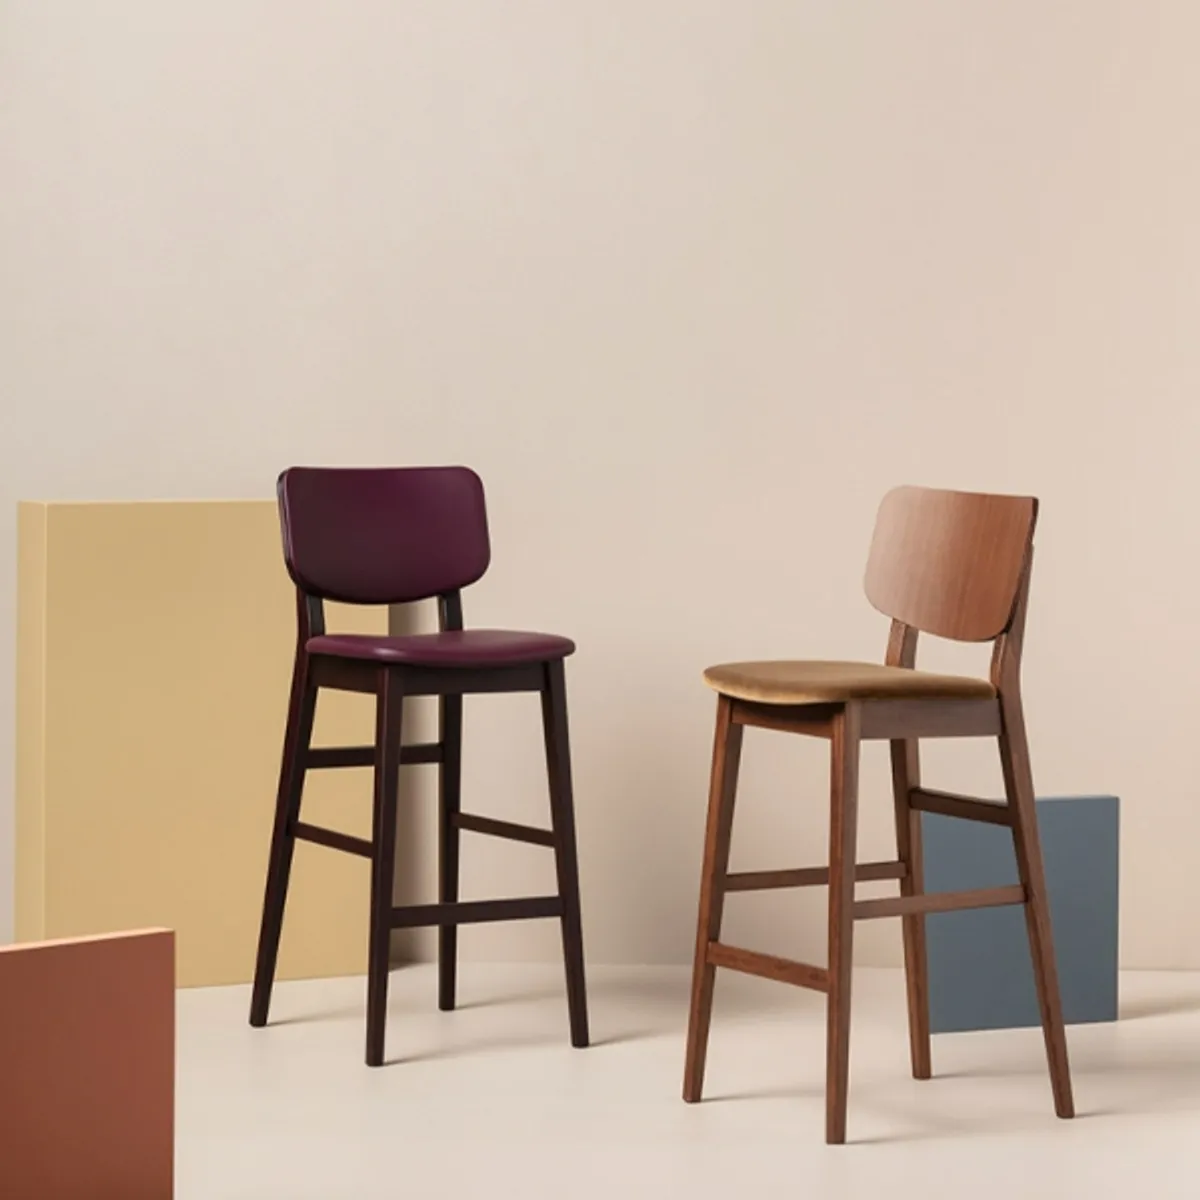 Alps soft bar stool Inside Out Contracts6